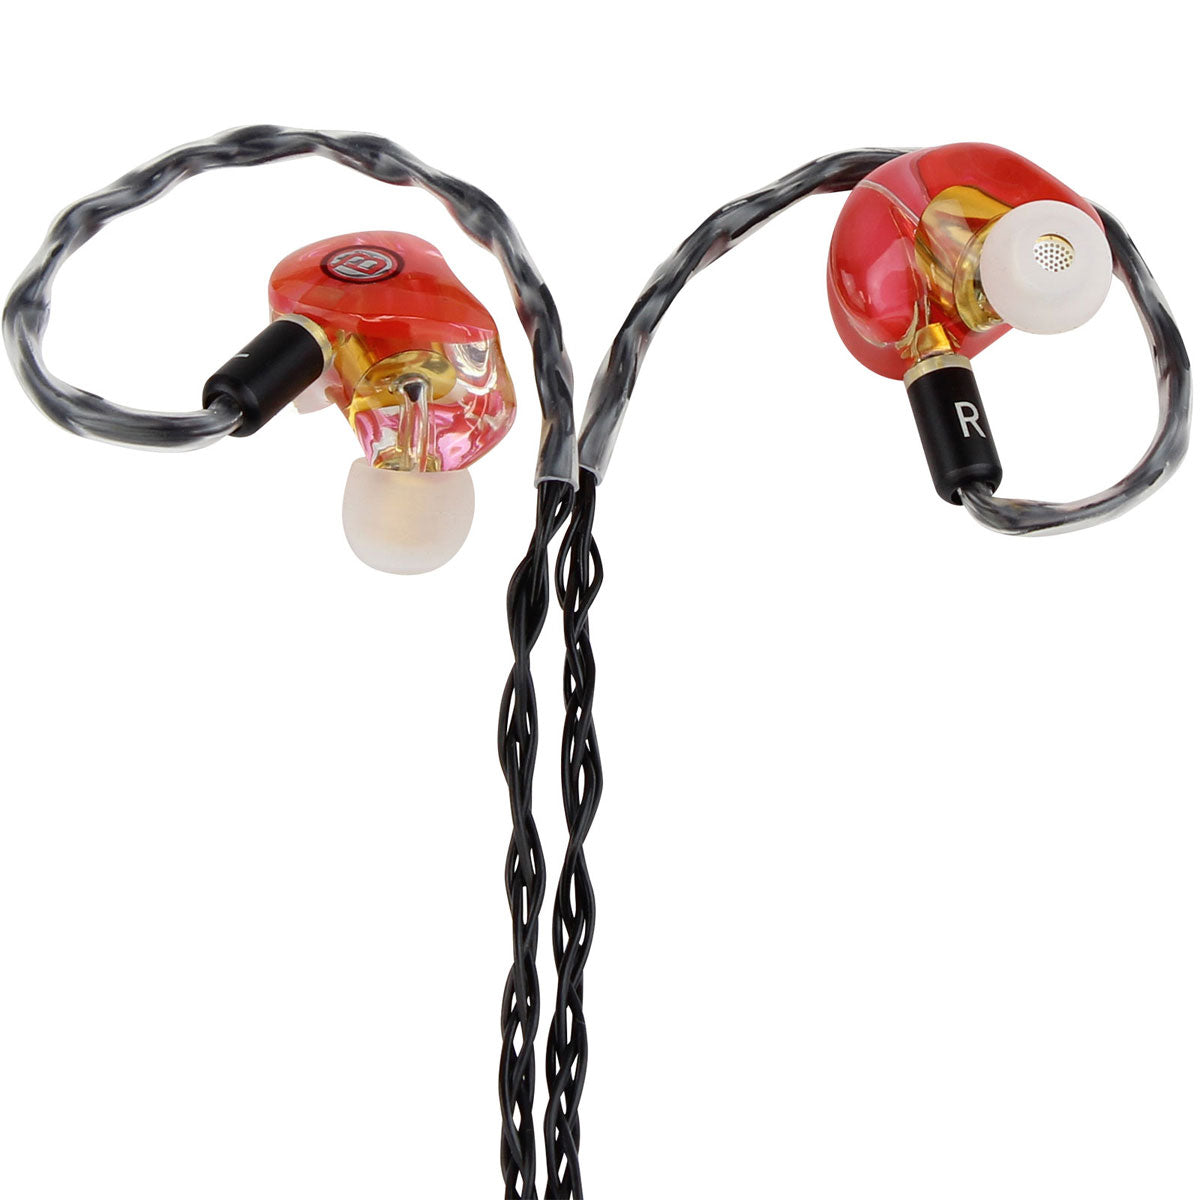 Blastking EARBUDS-8017-RED Professional In-Ear Monitors - Translucent Red